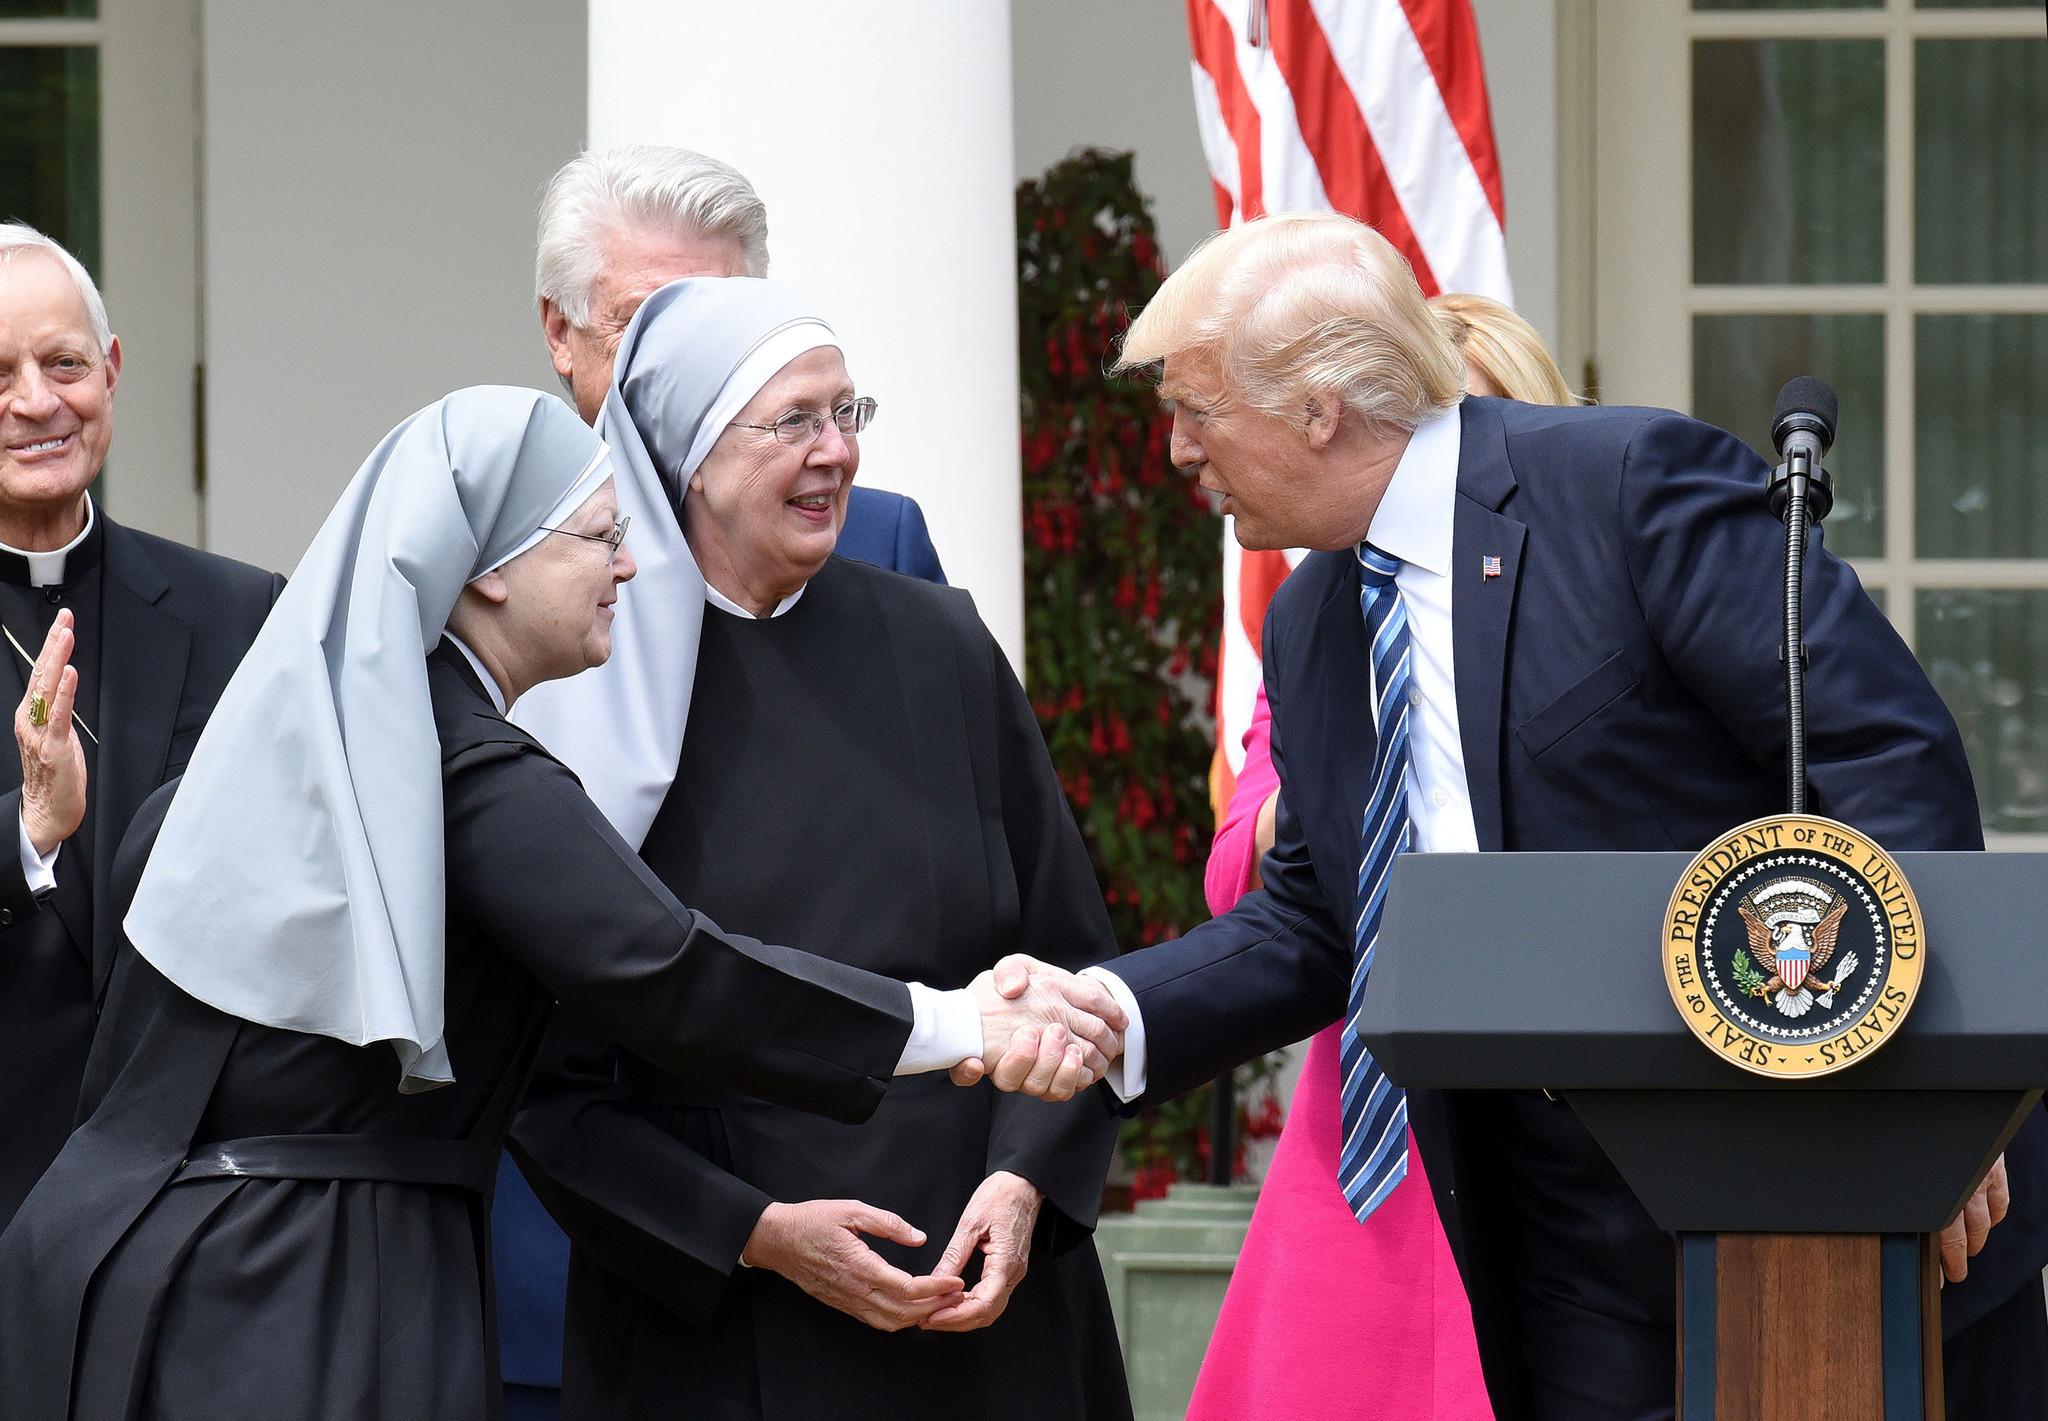 Little Sisters of the Poor approve Trump order on religion - Baltimore Sun